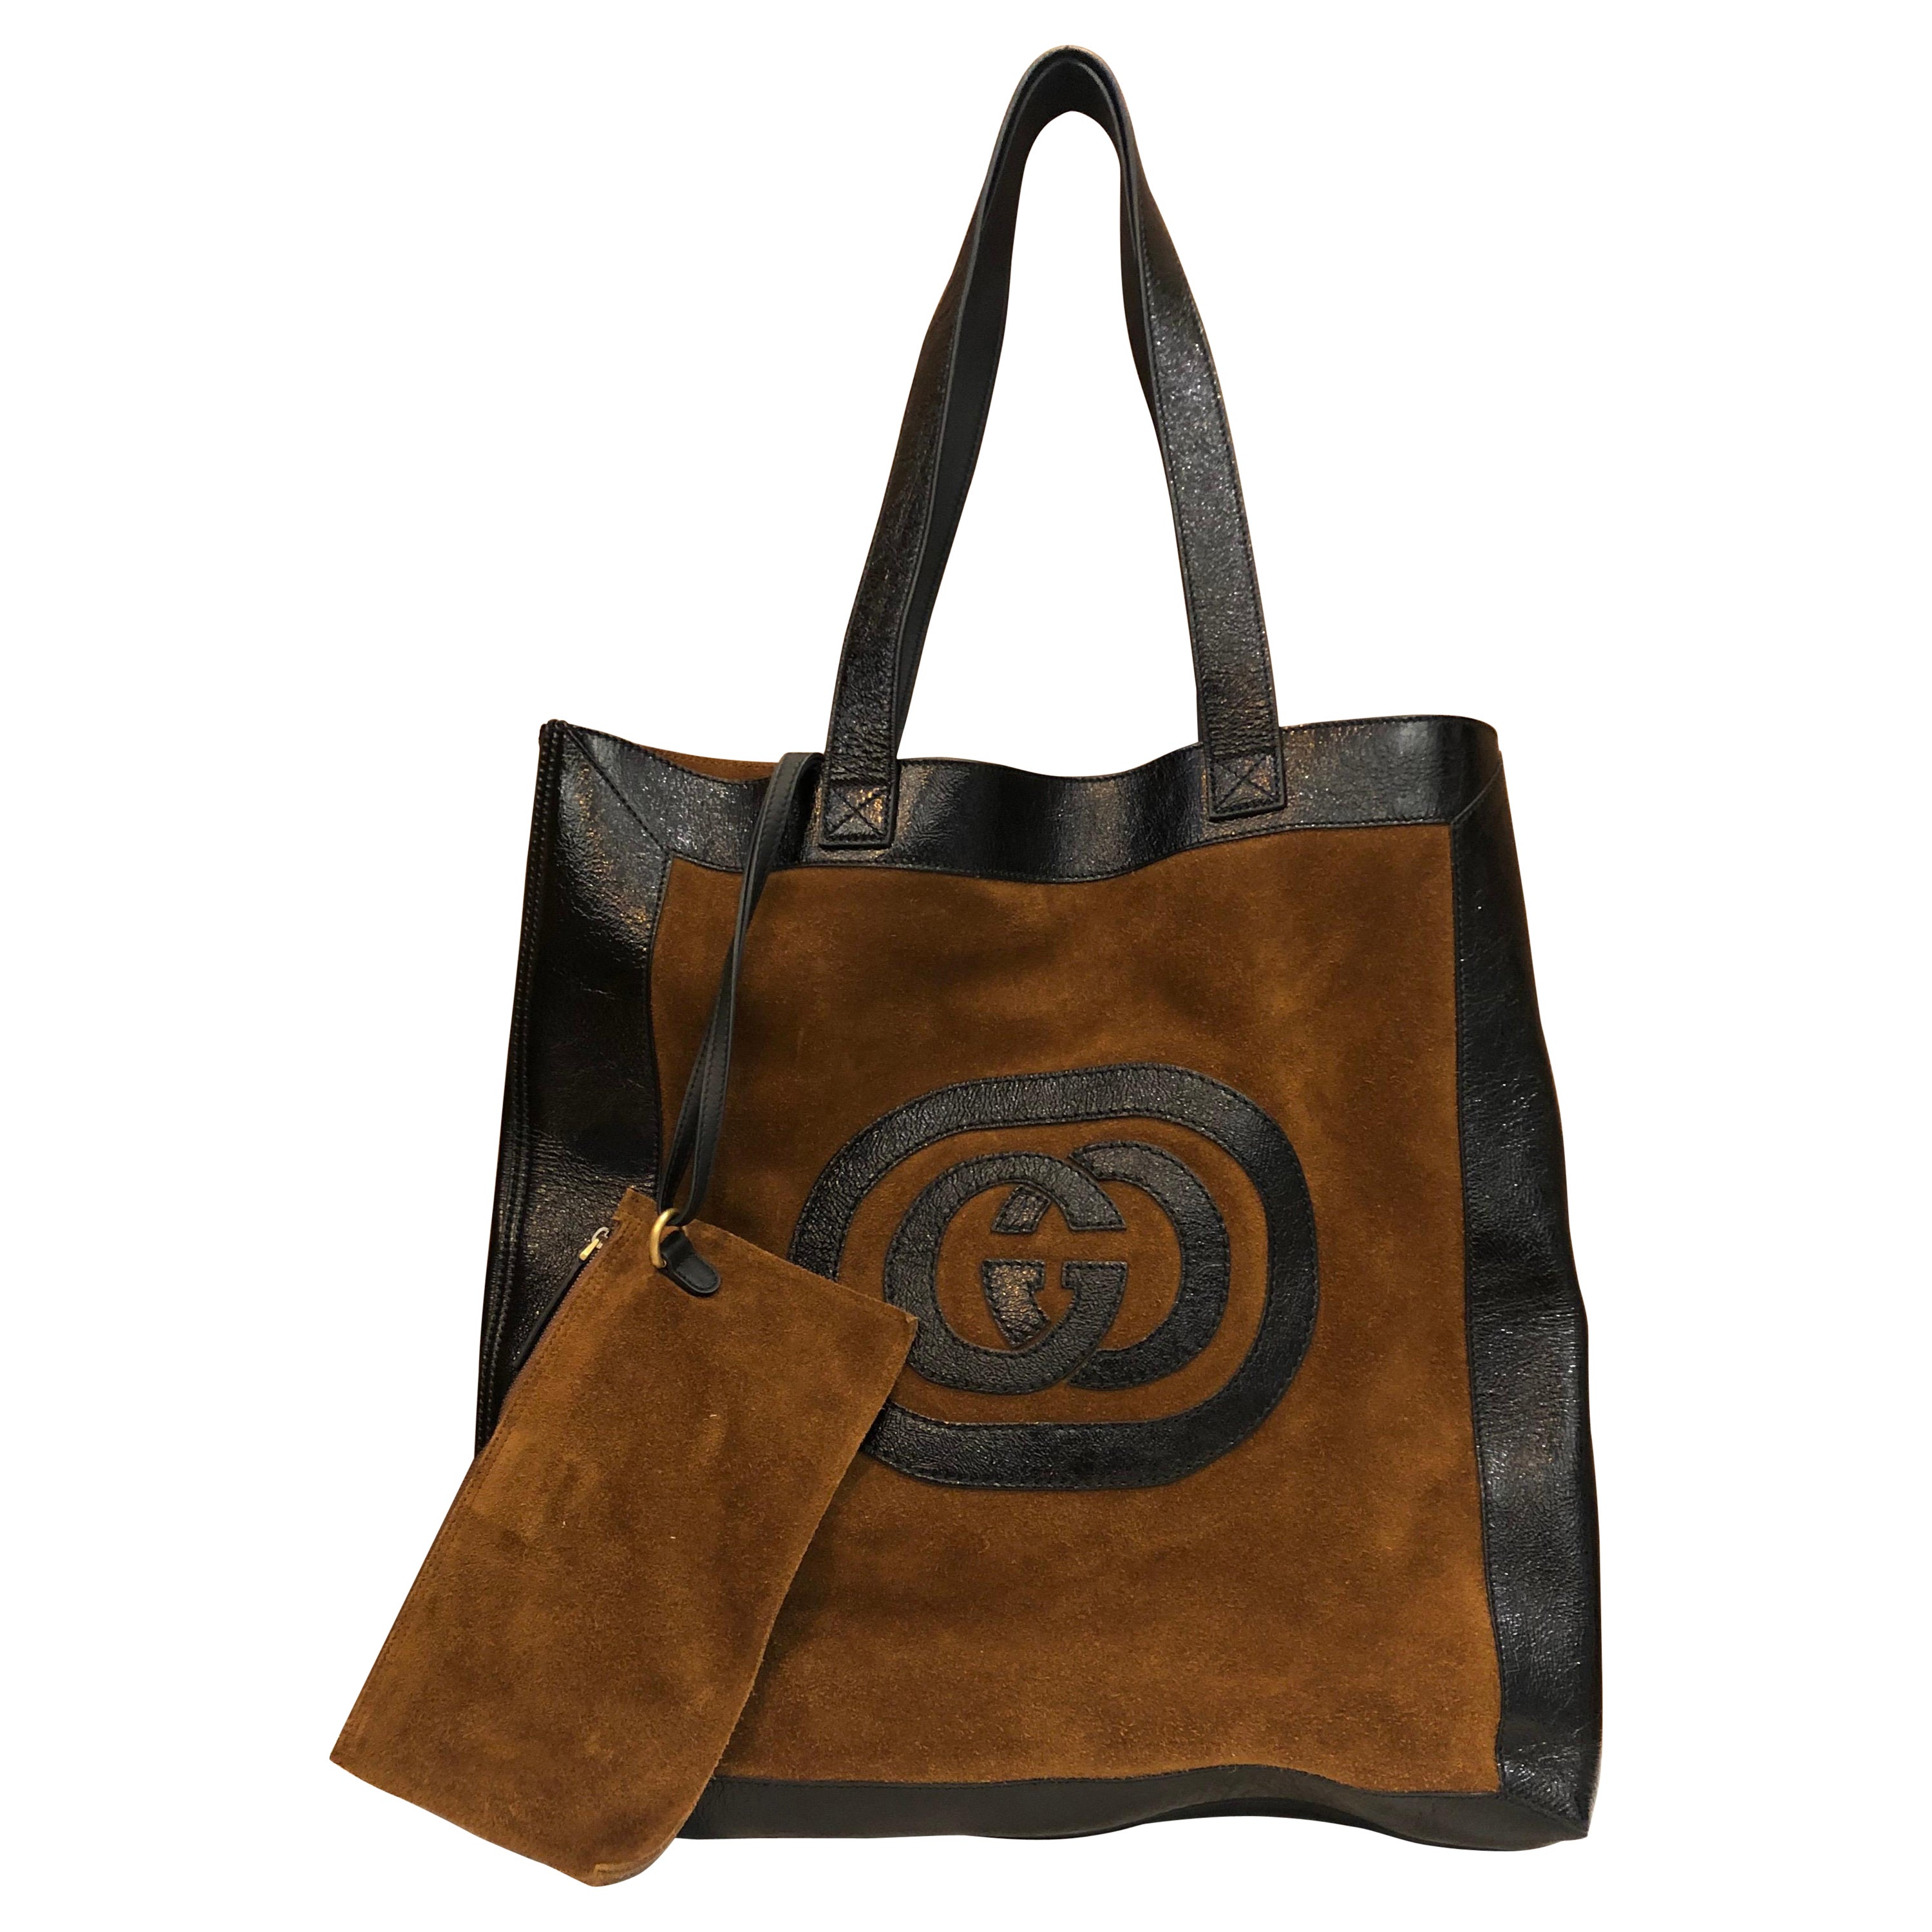 2010s GUCCI Brown Suede Oversized Tote Bag